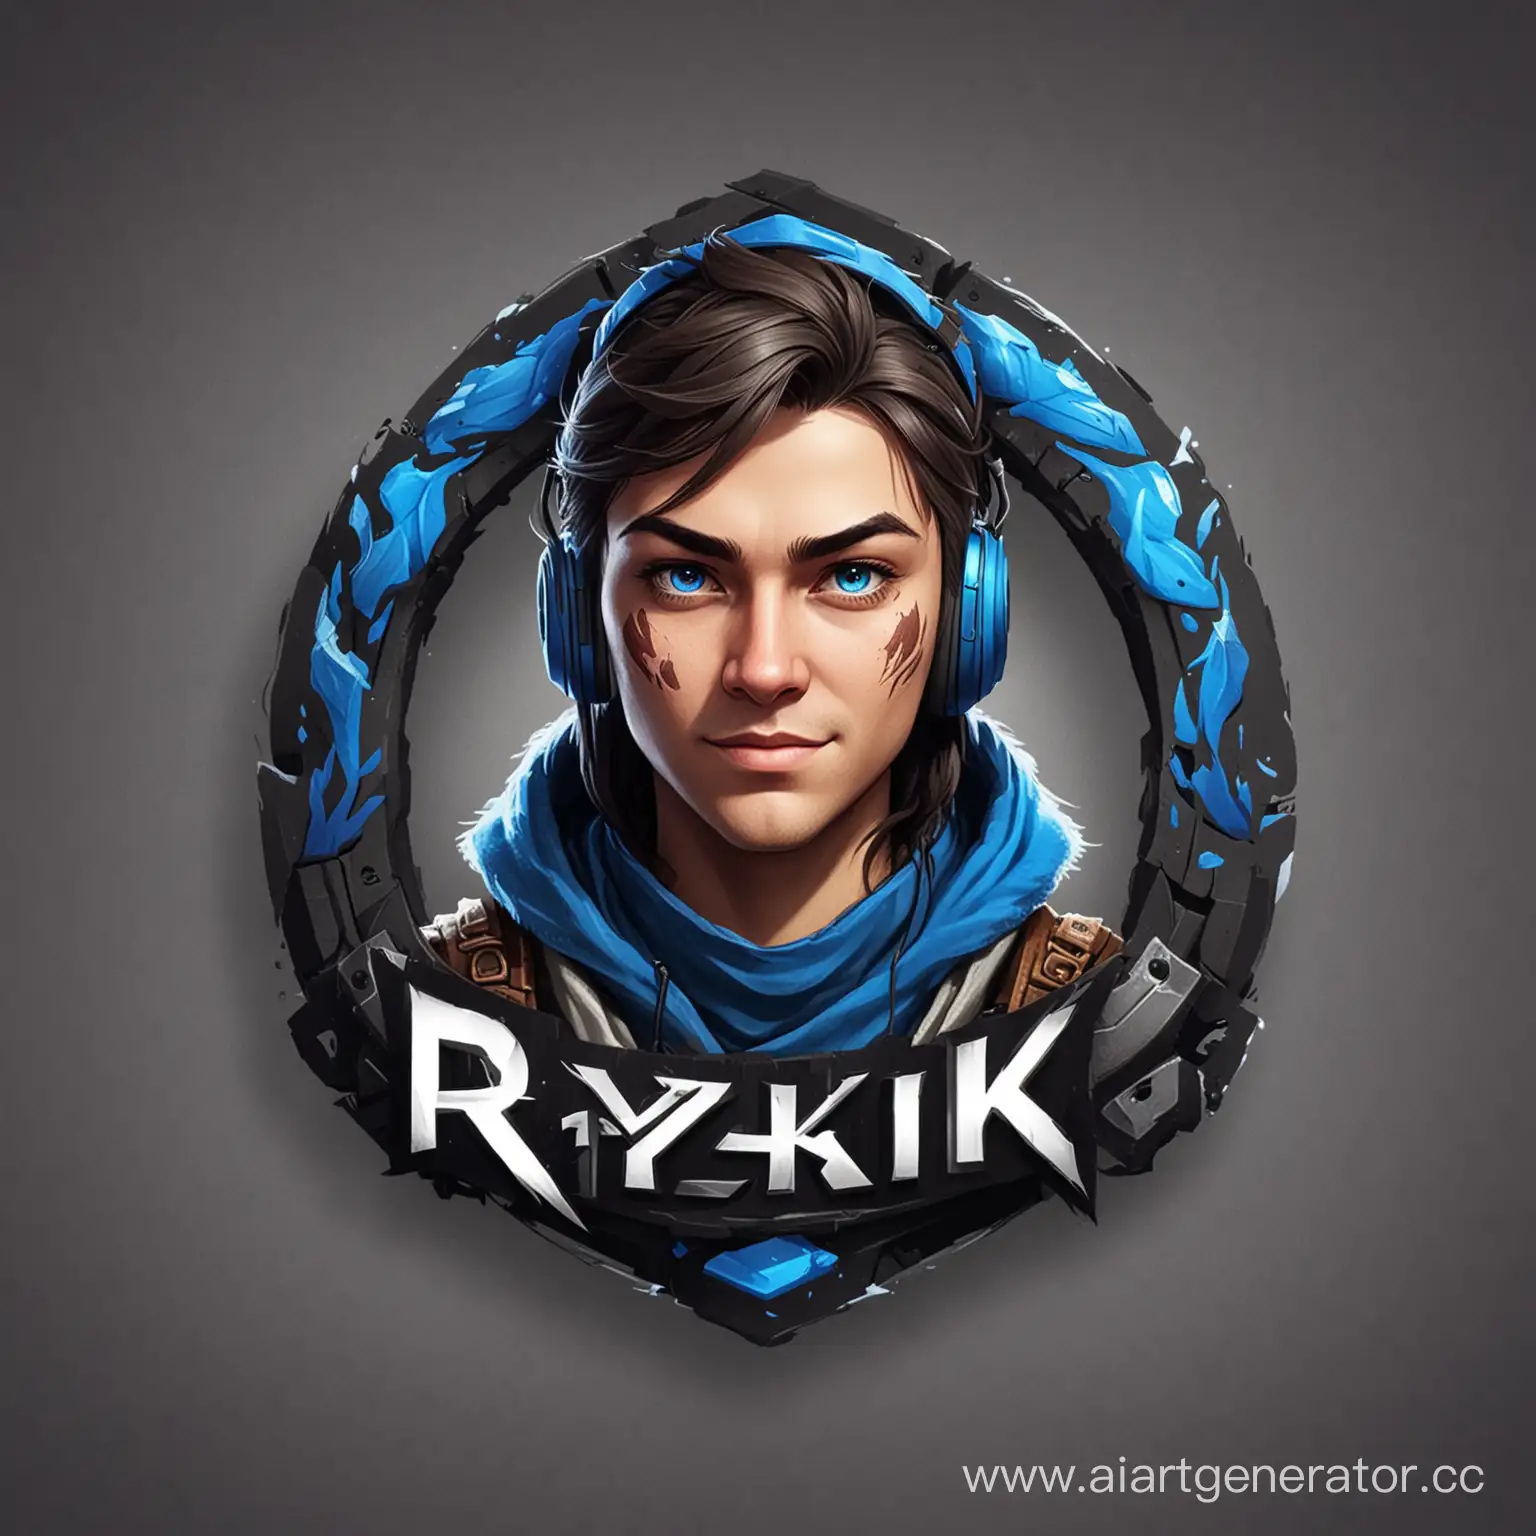 Ryzhik-Avatar-for-Gaming-Channel-with-Dynamic-Design-and-Vibrant-Colors